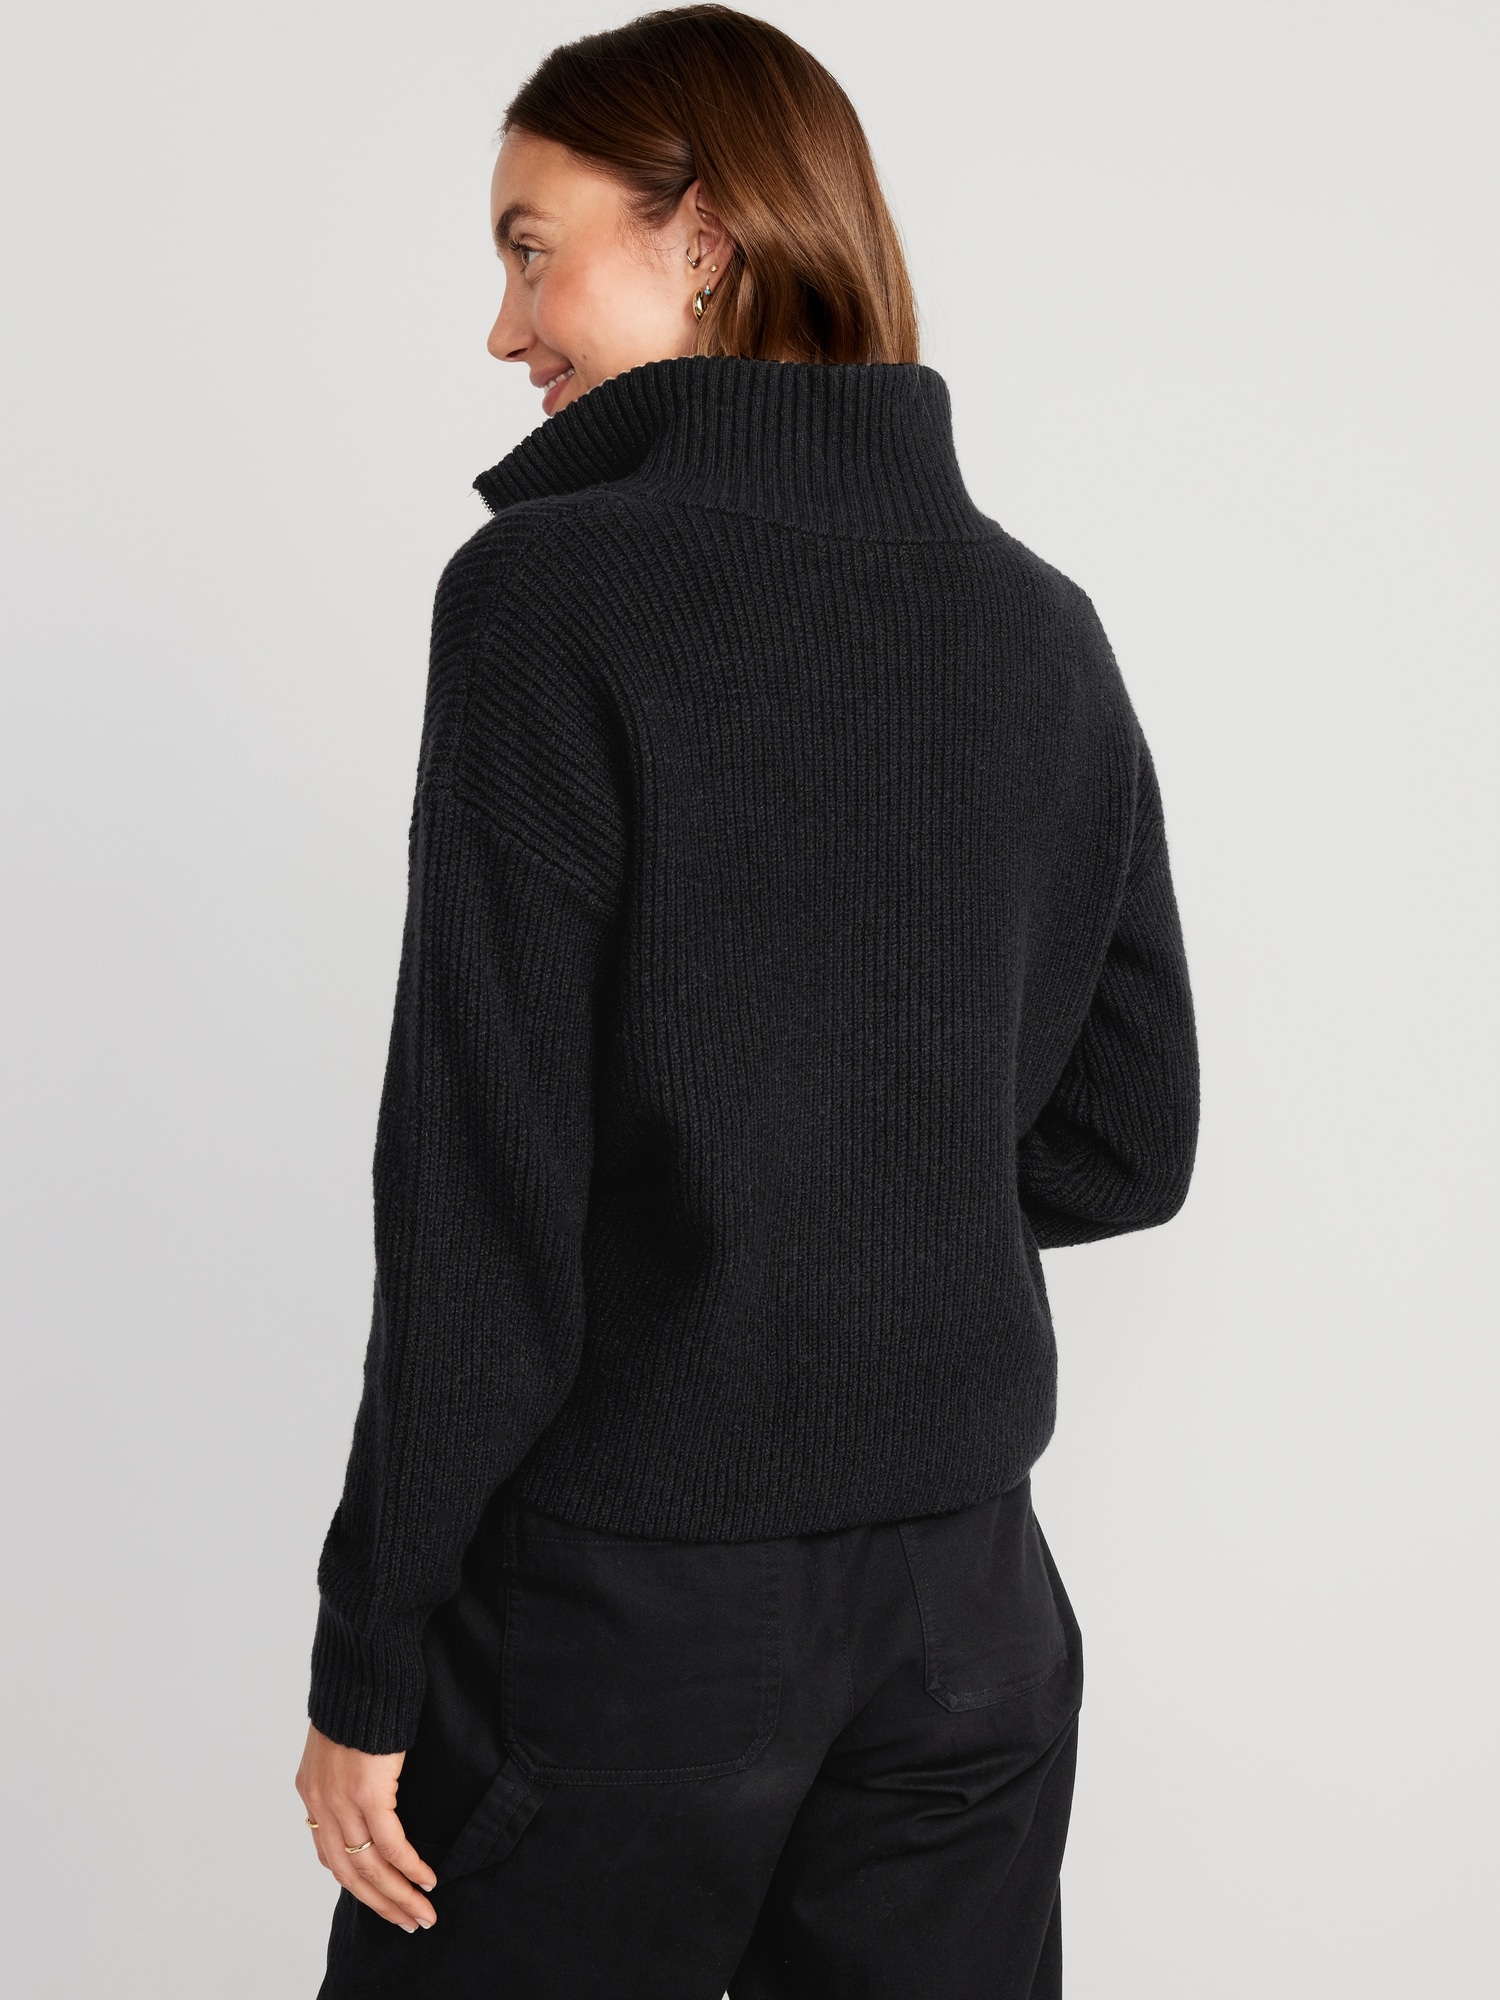 Loose 1/2-Zip Shaker-Stitch Pullover | Old Navy